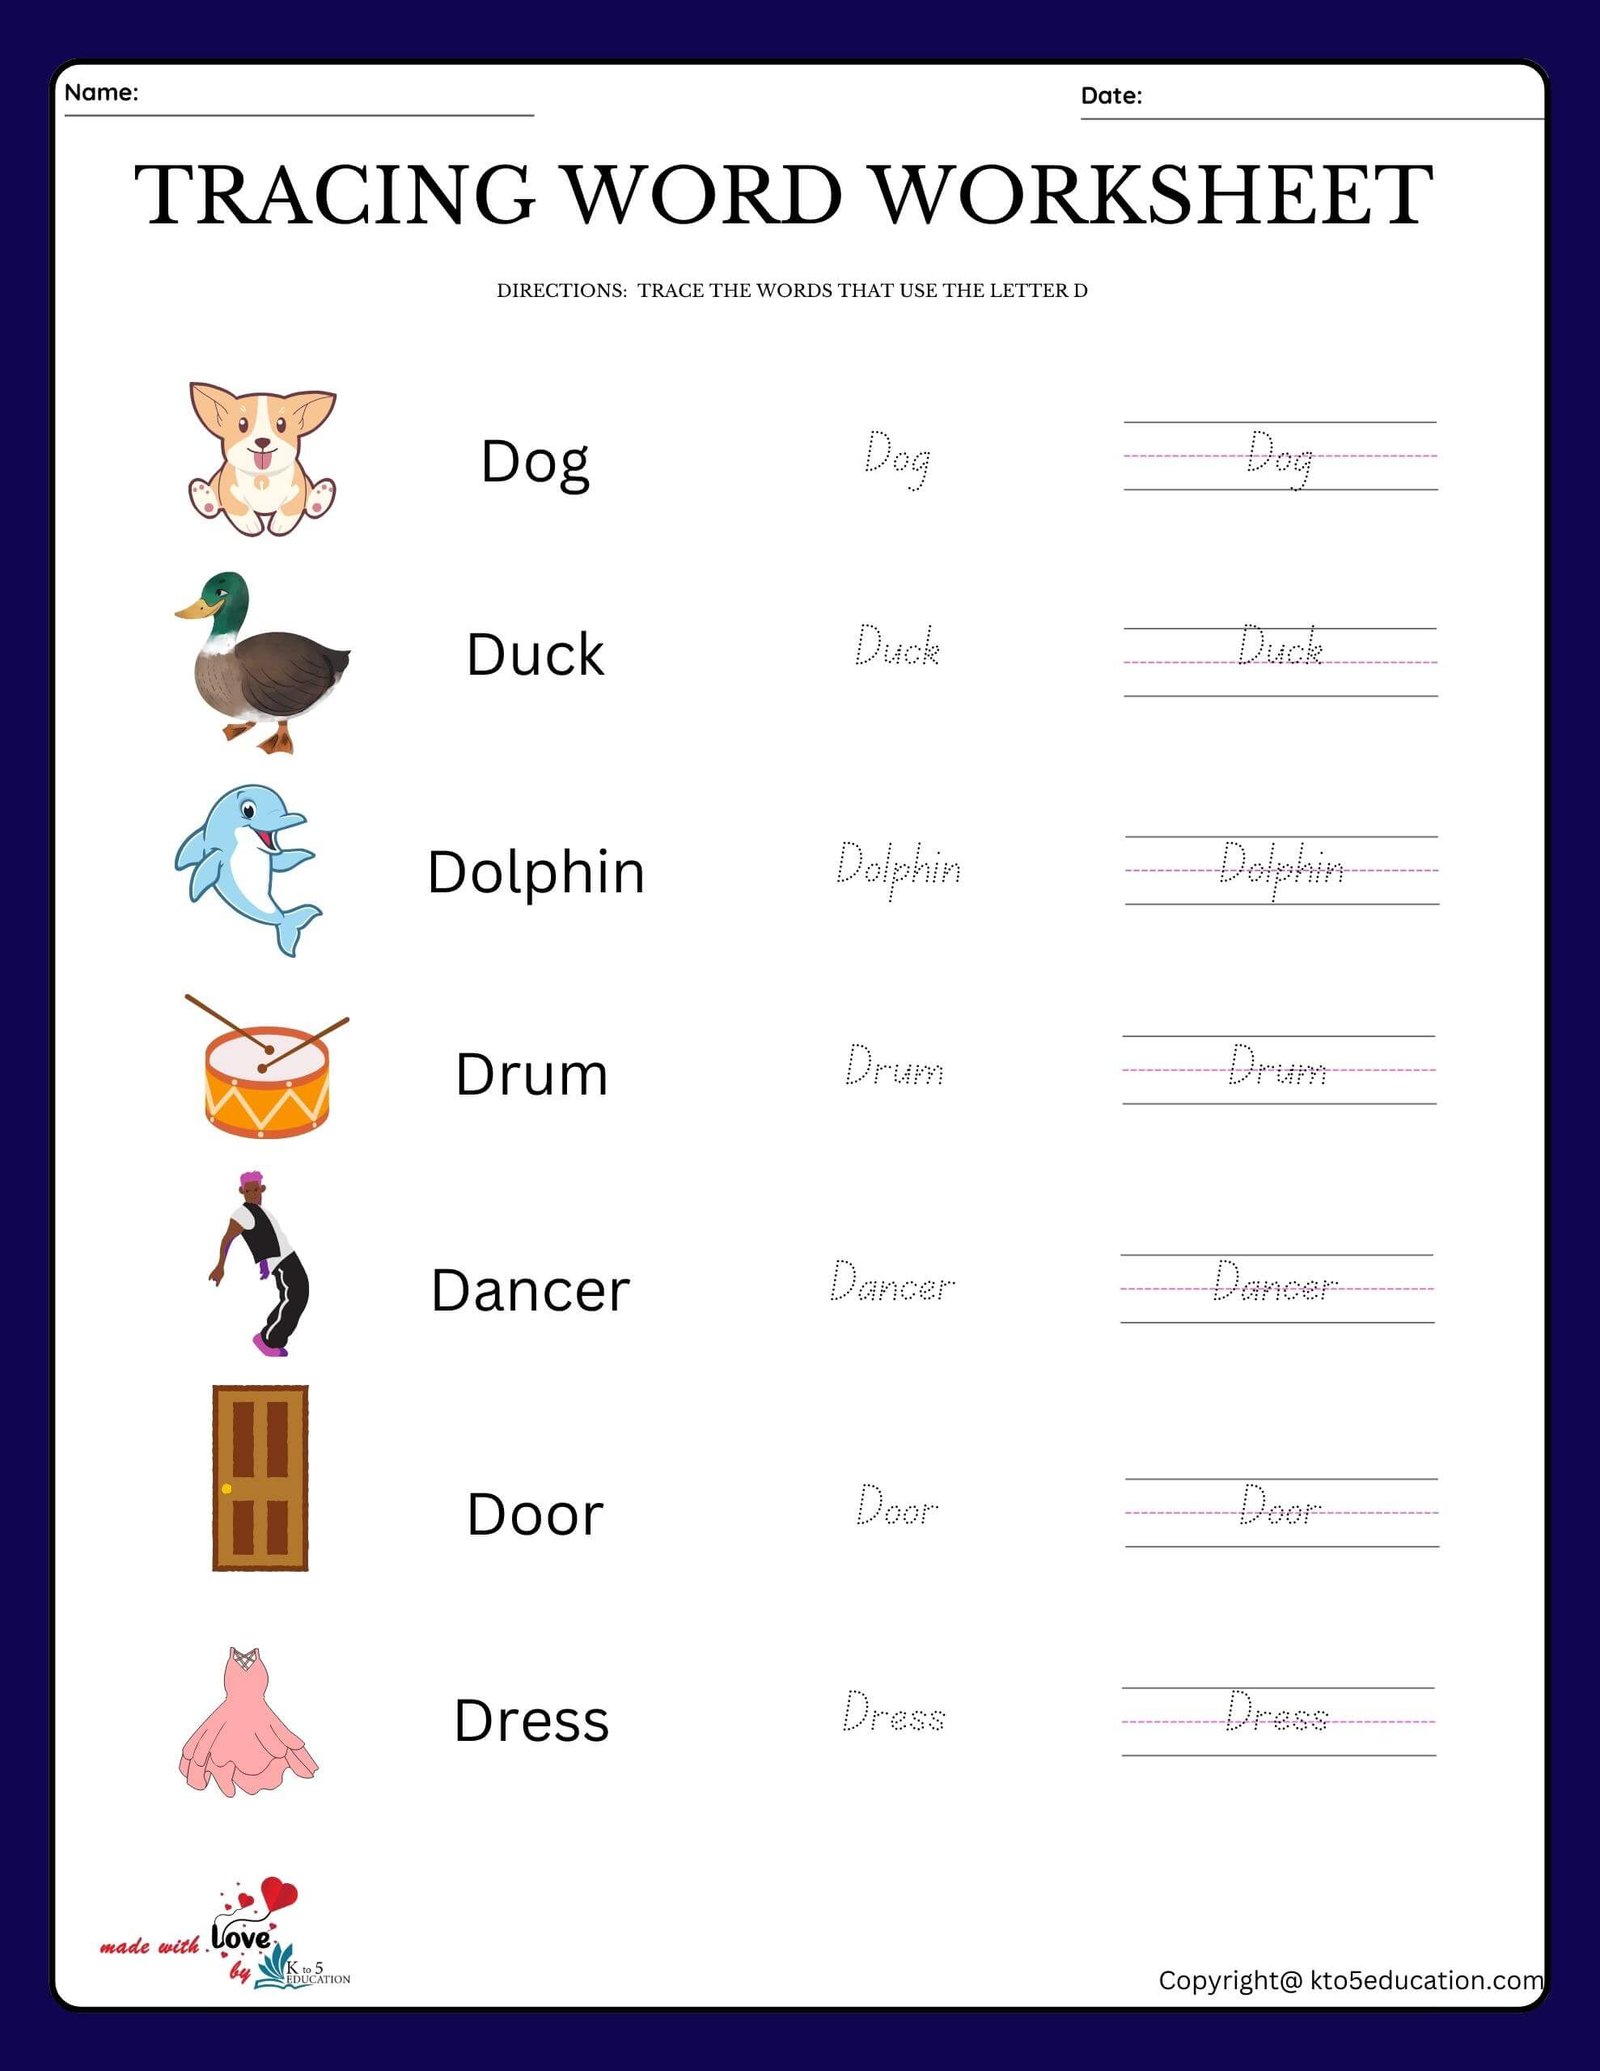 Trace The Words That Use The Letter D Worksheet